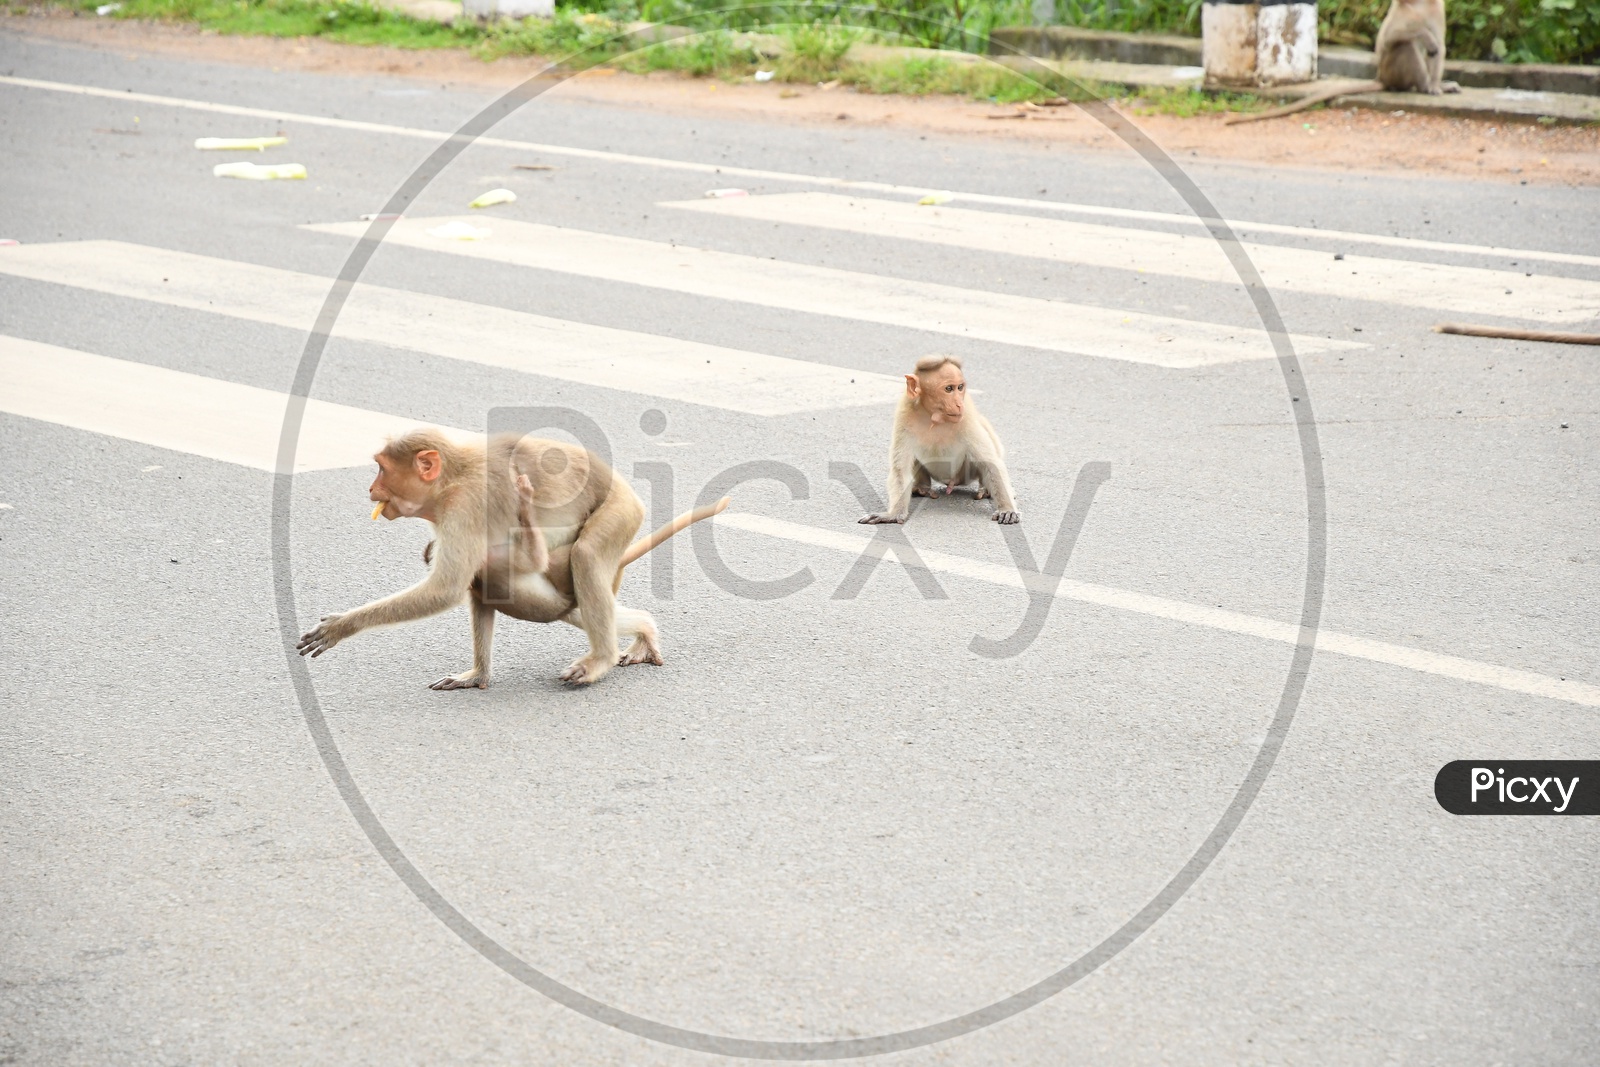 A Monkey carrying her baby on the road